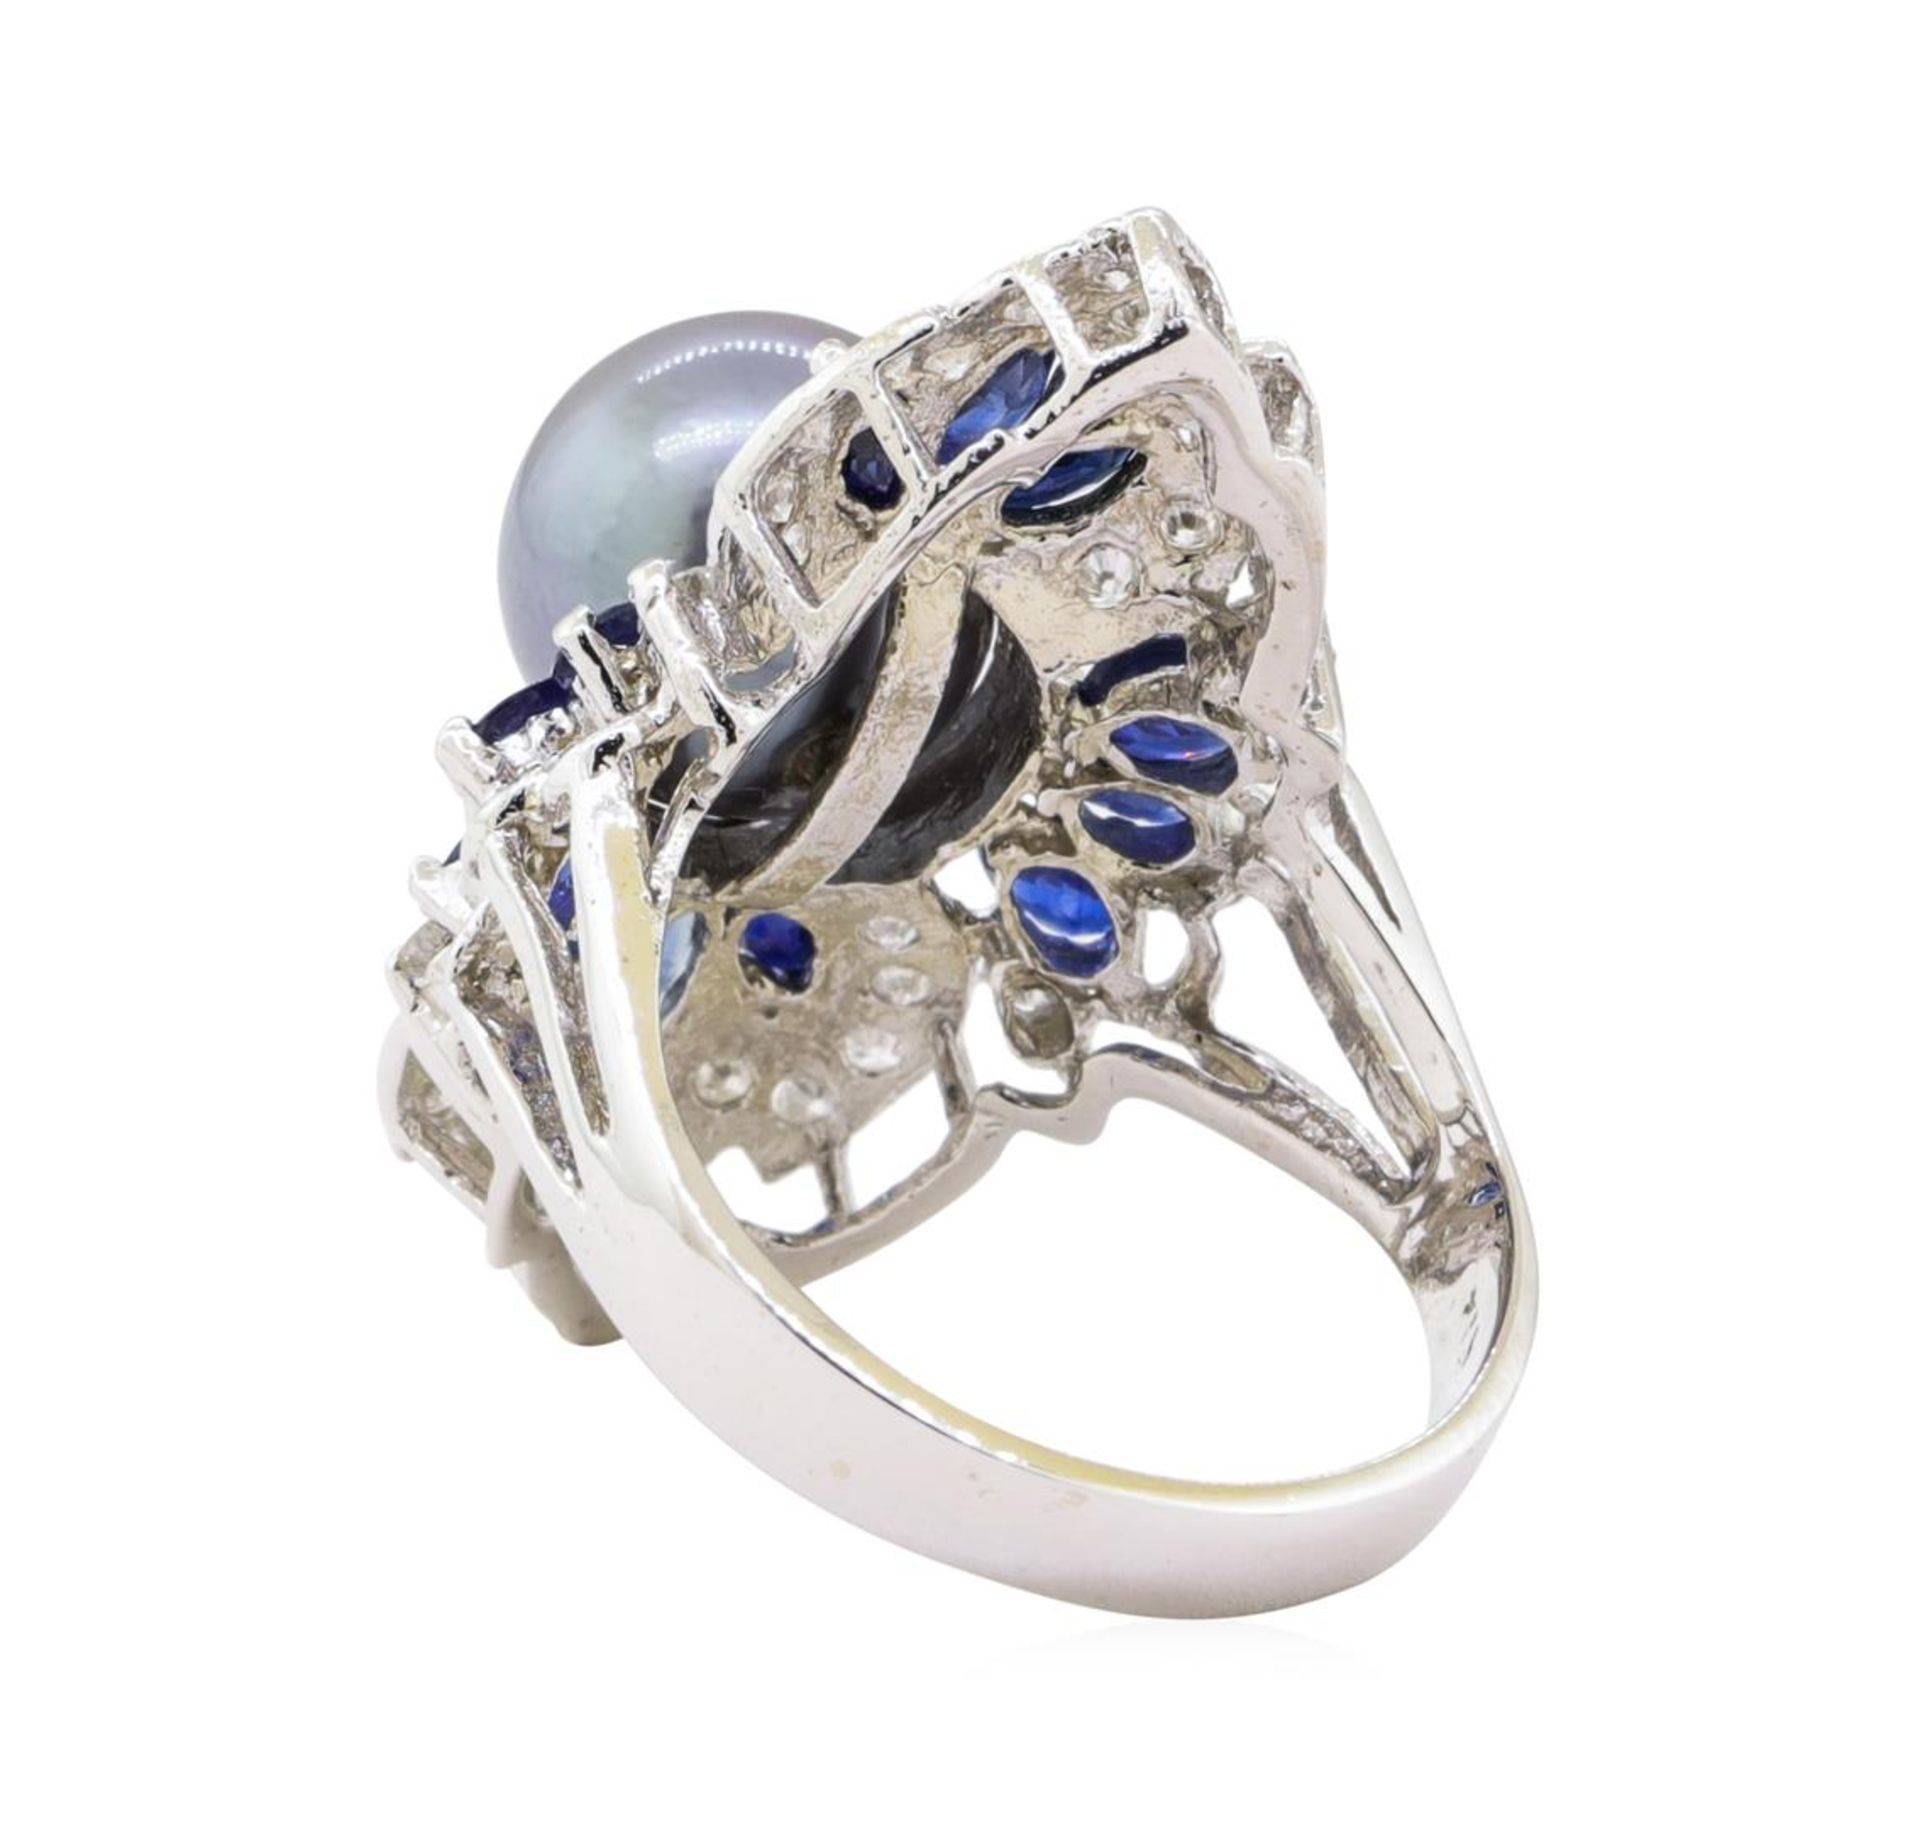 Pearl, Sapphire and Diamond Ring - 14KT White Gold - Image 3 of 5